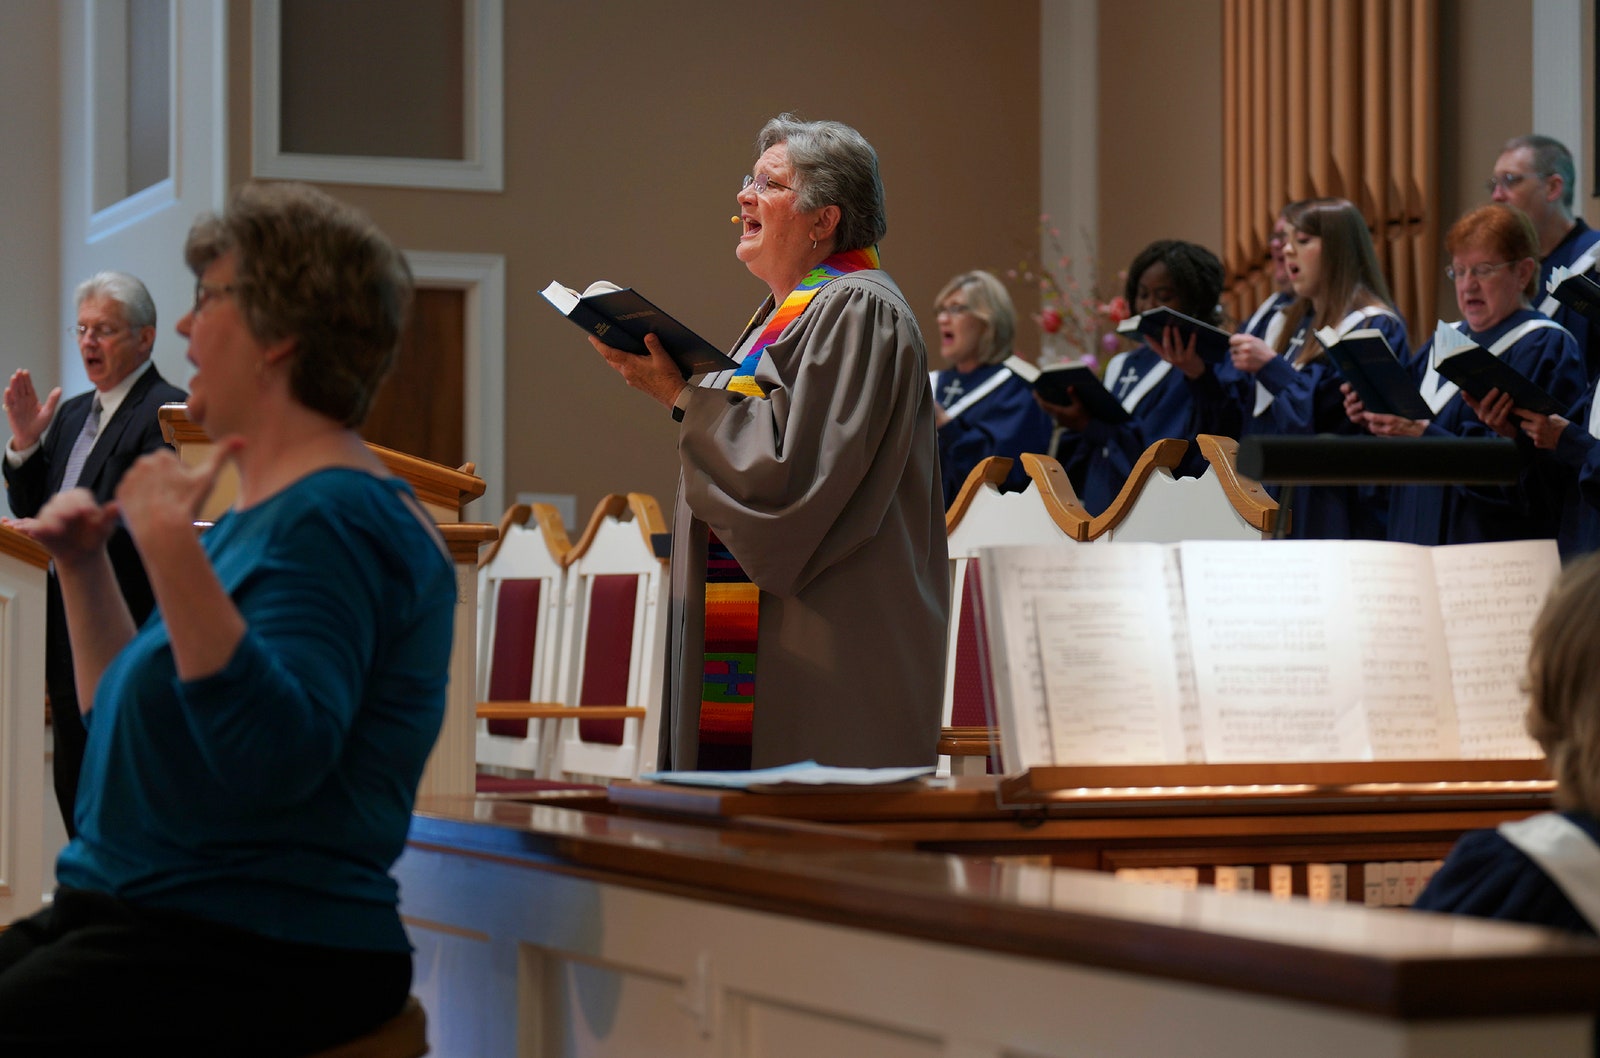 Reverend Linda Barnes Popham standing in front of a choir singing holding a hymnal.